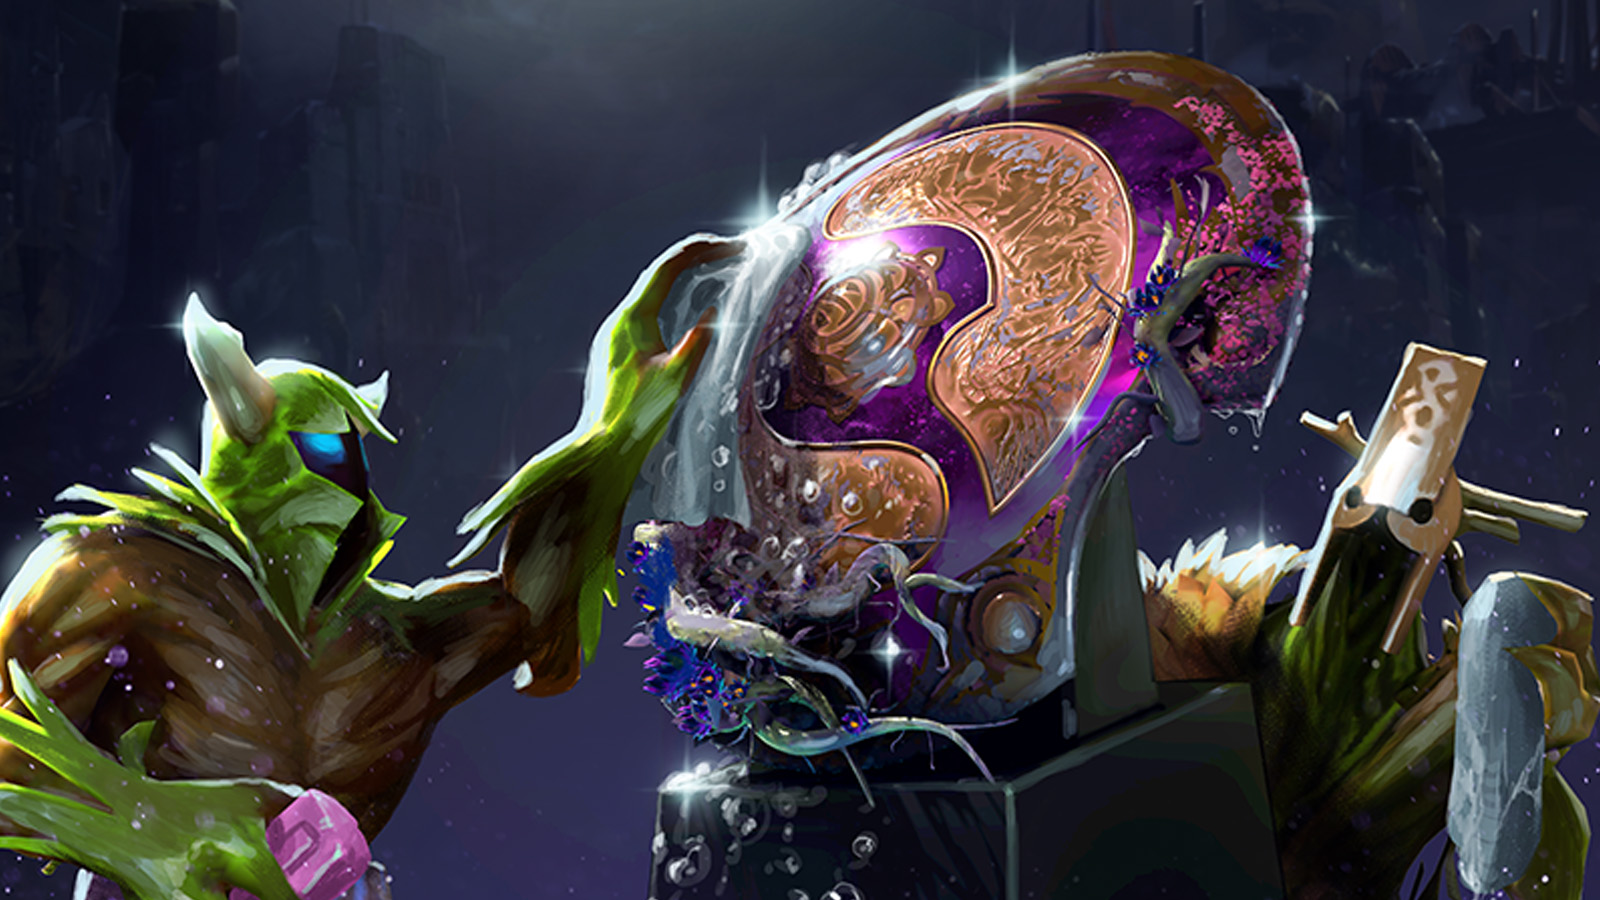 Dota 2 The International 2022 Last Chance Qualifier live updates Full schedule, scores, and standings